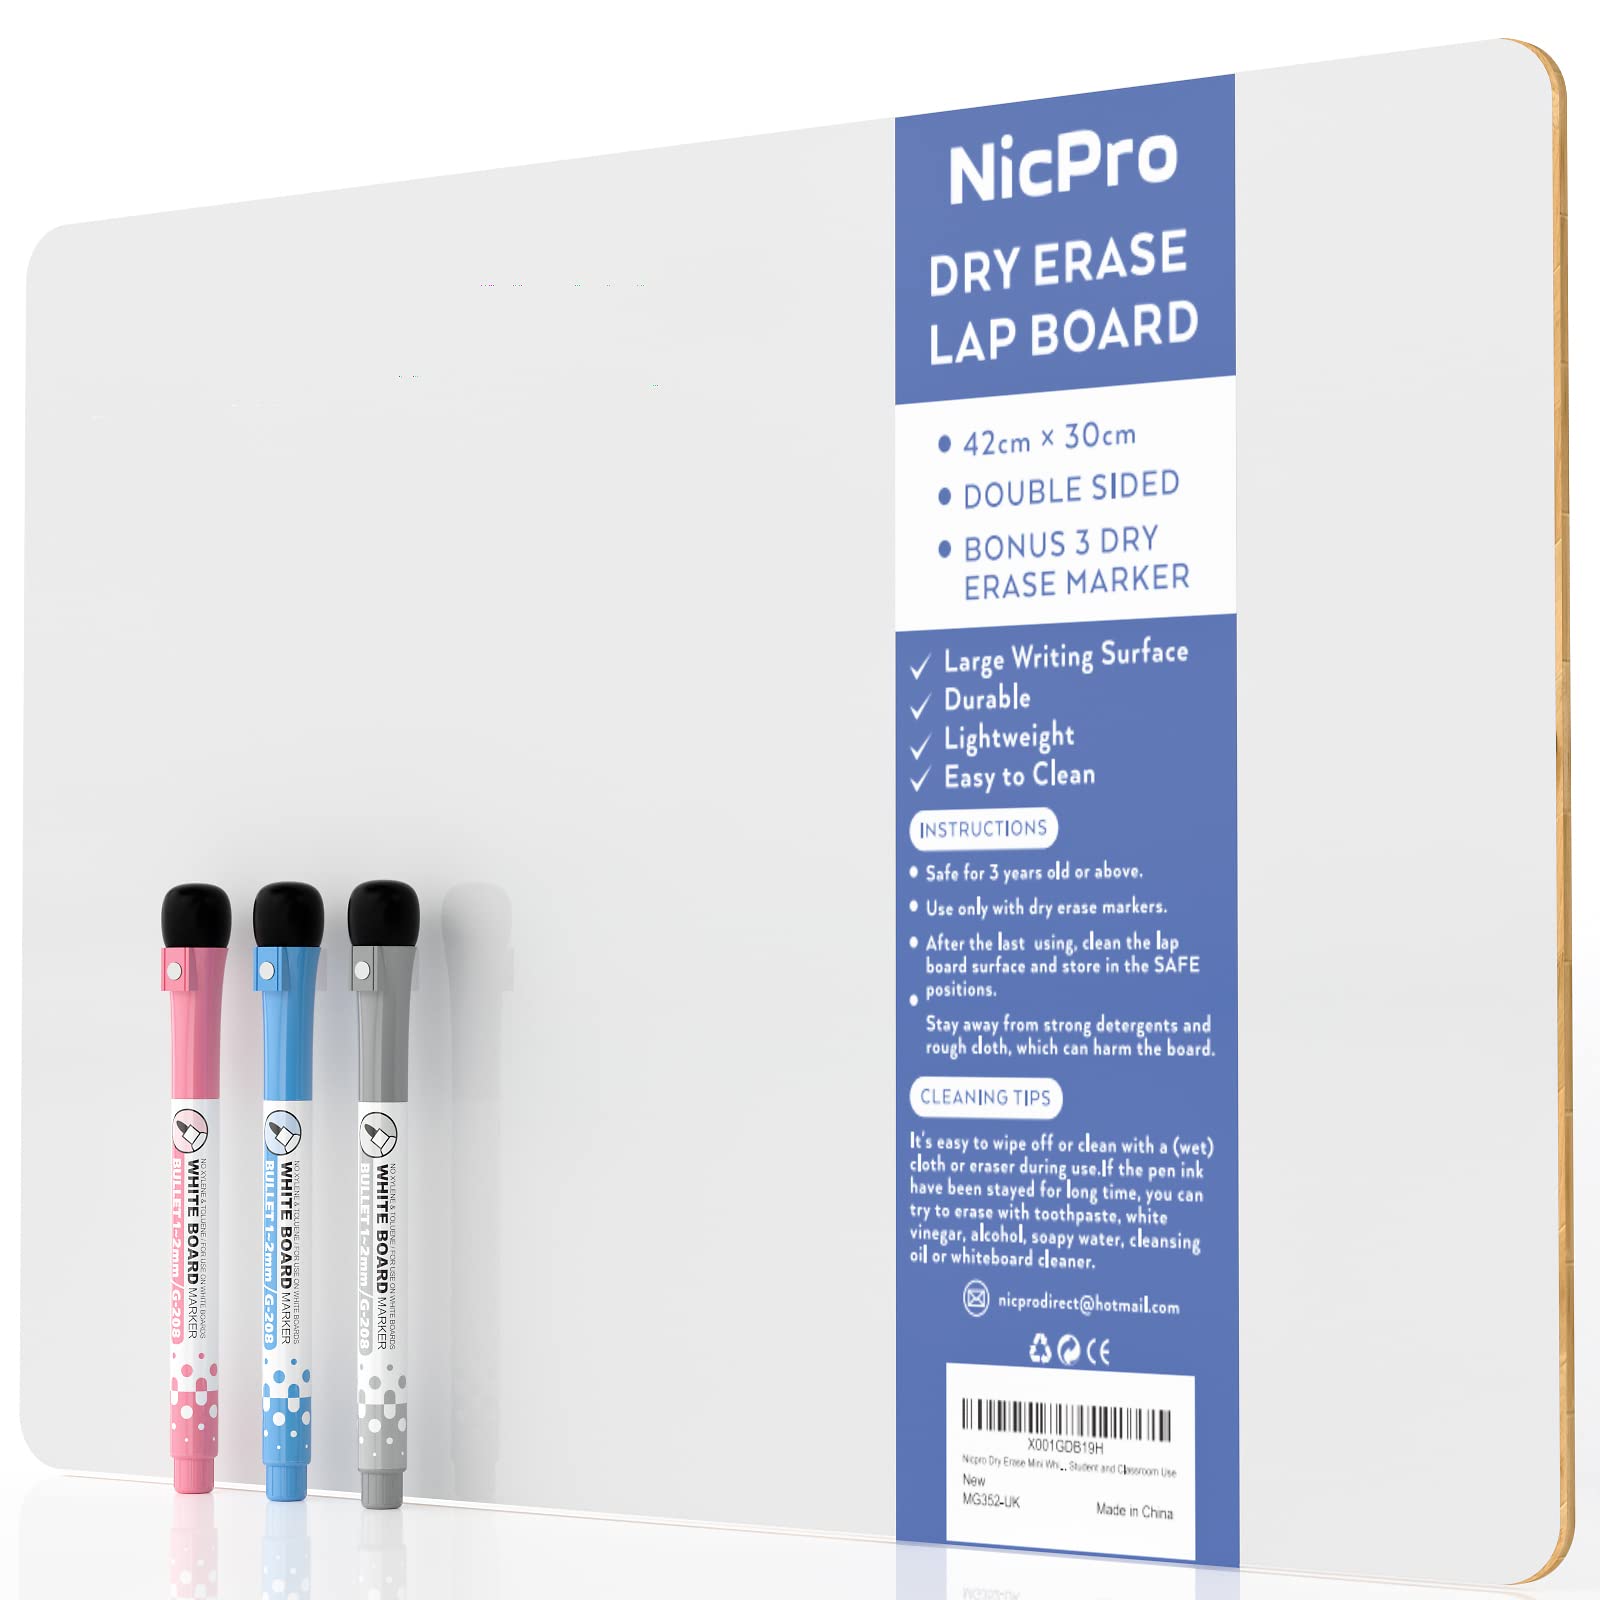 Nicpro 12 x 16 inches Dry Erase Whiteboard, Double Sided Portable Lapboard with 3 Water-Based Pens